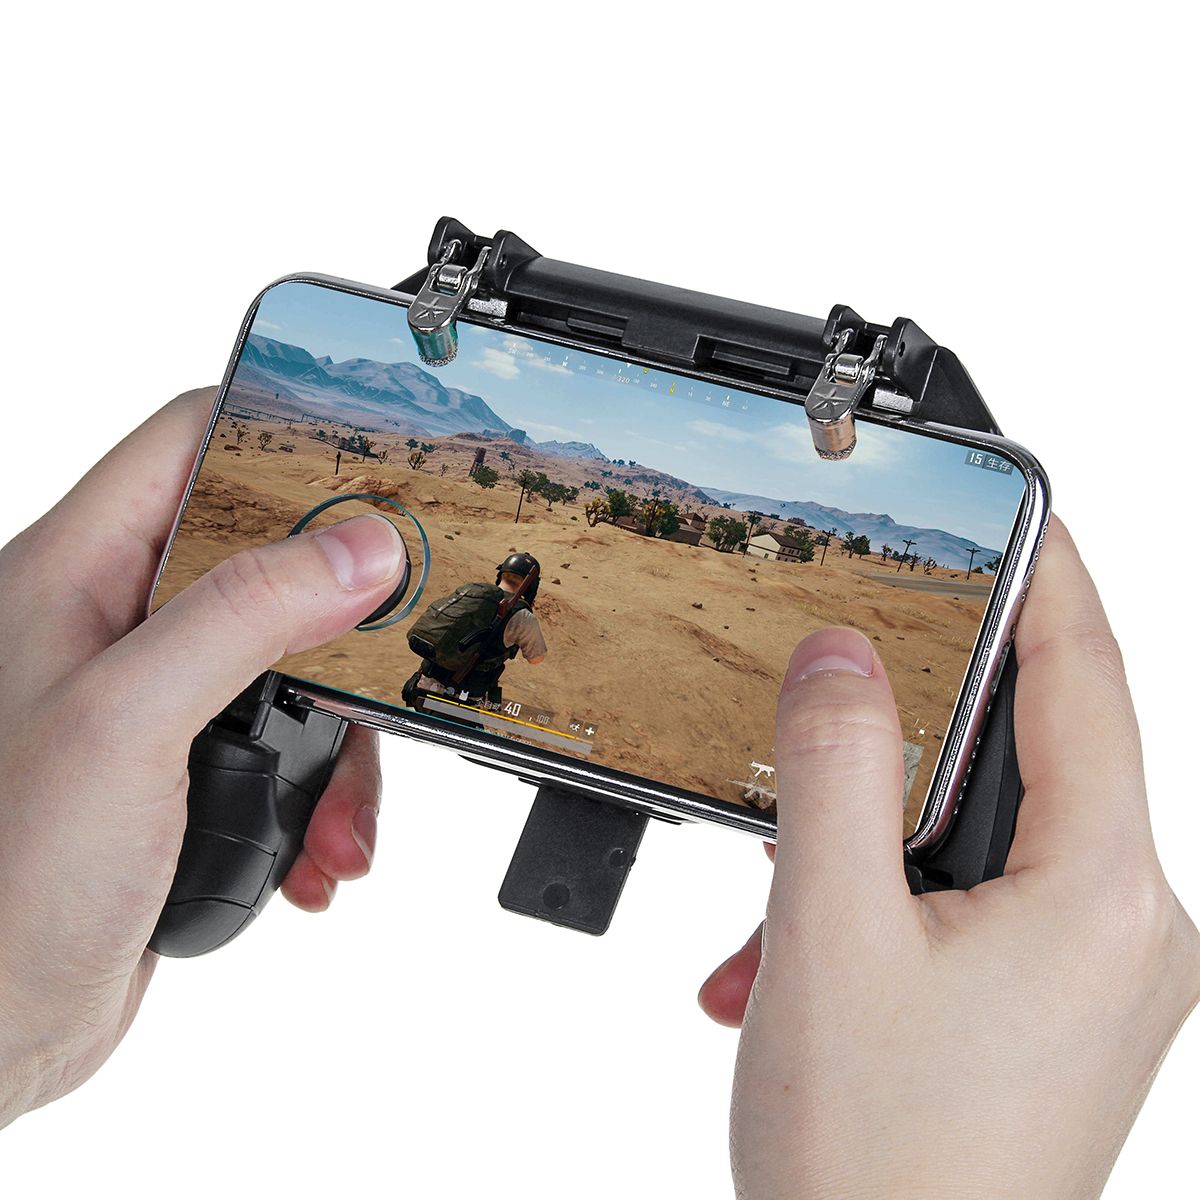 Fire-Stick-Gamepad-Joystick-for-PUBG-Mobile-Game-Controller-Shooter-Button-Trigger-for-iOS-Android-C-1669512